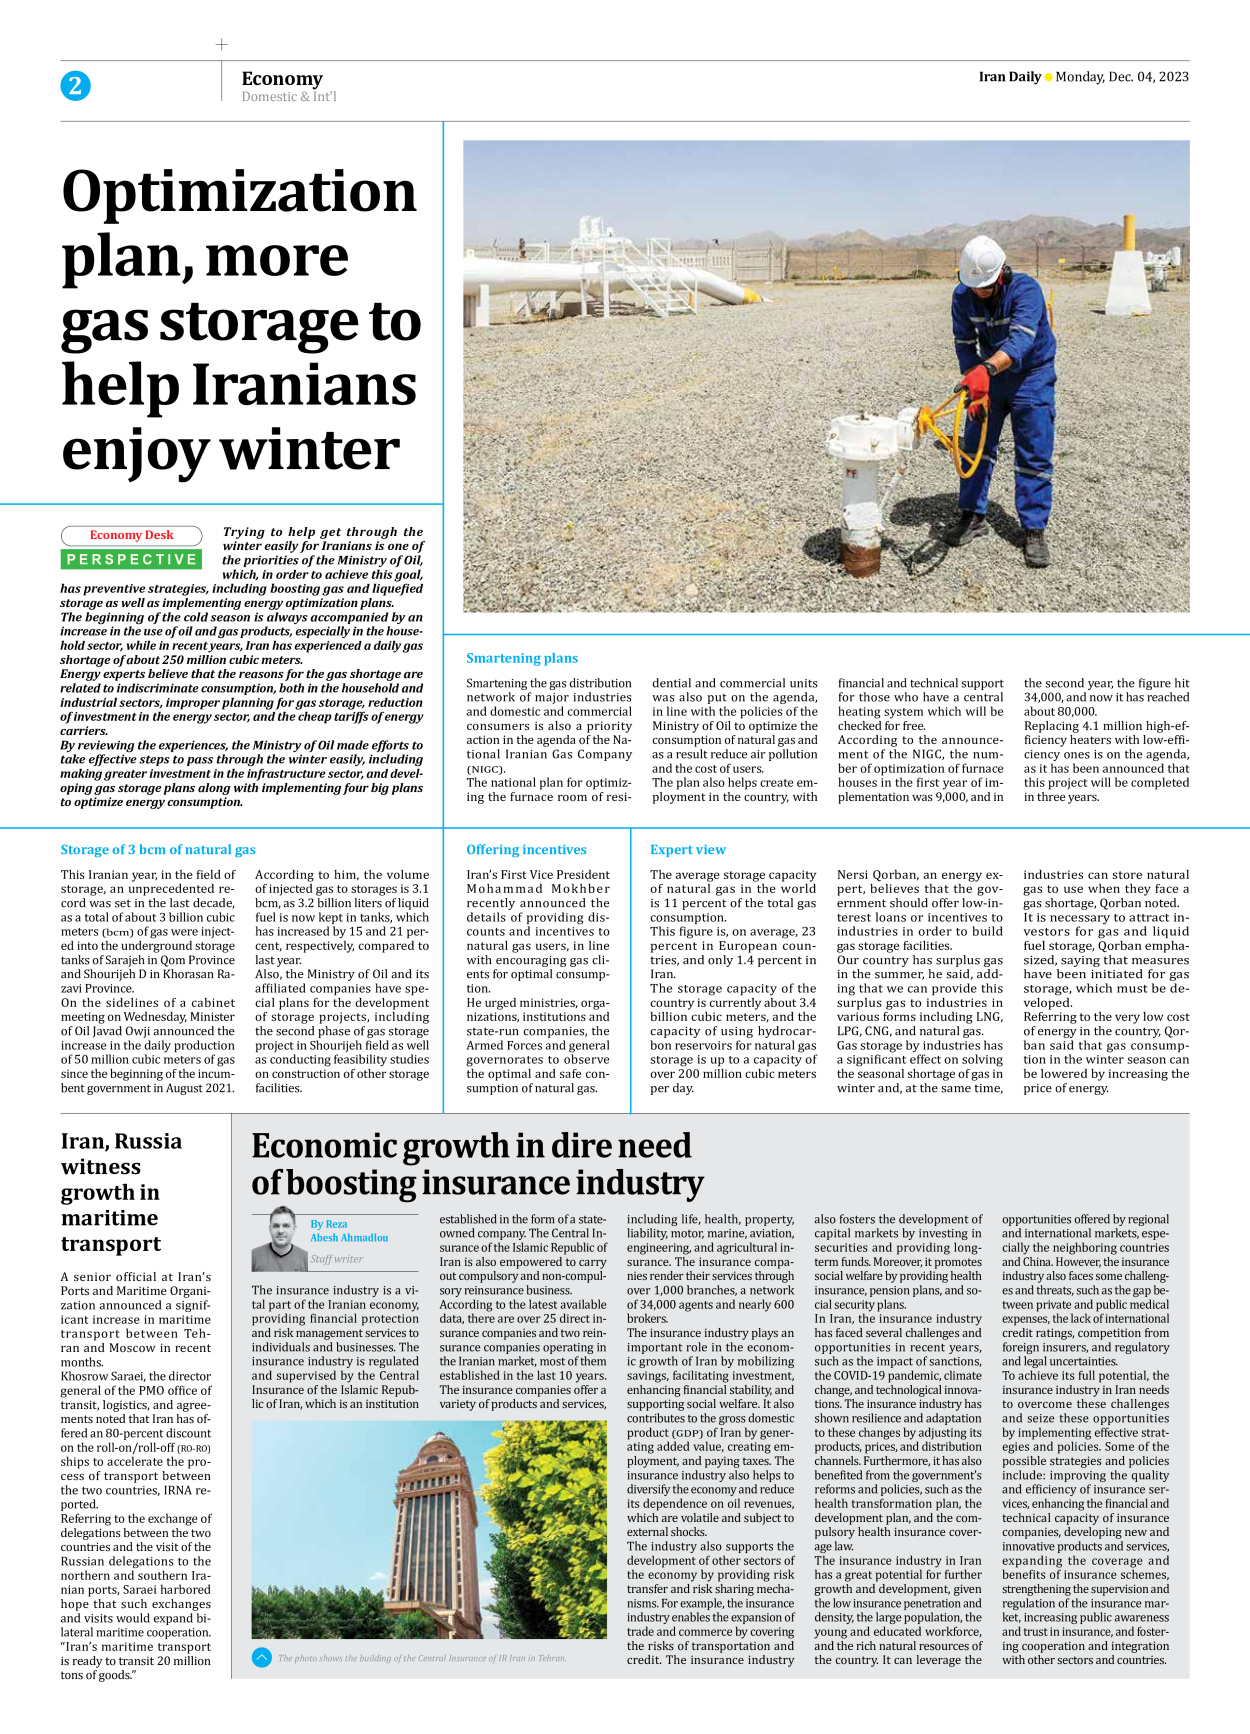 Iran Daily - Number Seven Thousand Four Hundred and Fifty One - 04 December 2023 - Page 2